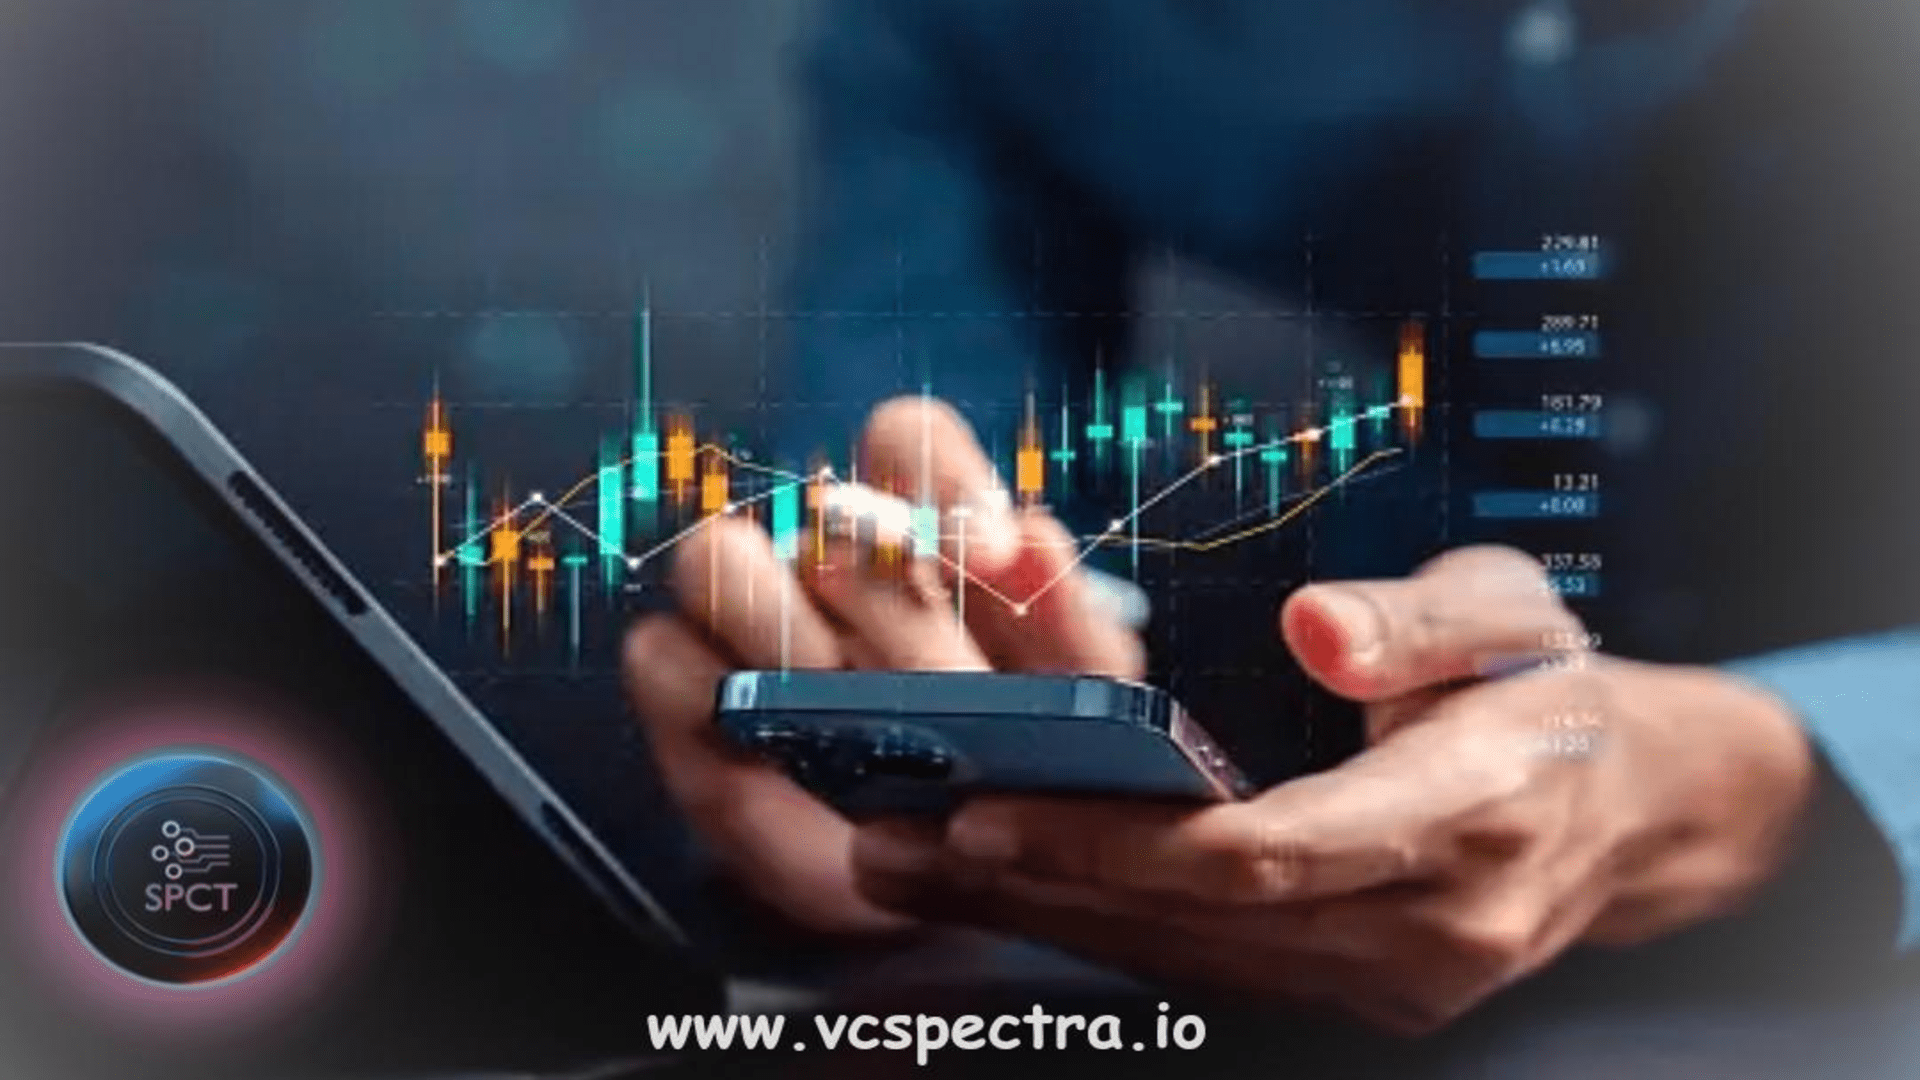 Compound and Litecoin Investors Find VC Spectra Much More Profitable As Price Pumps